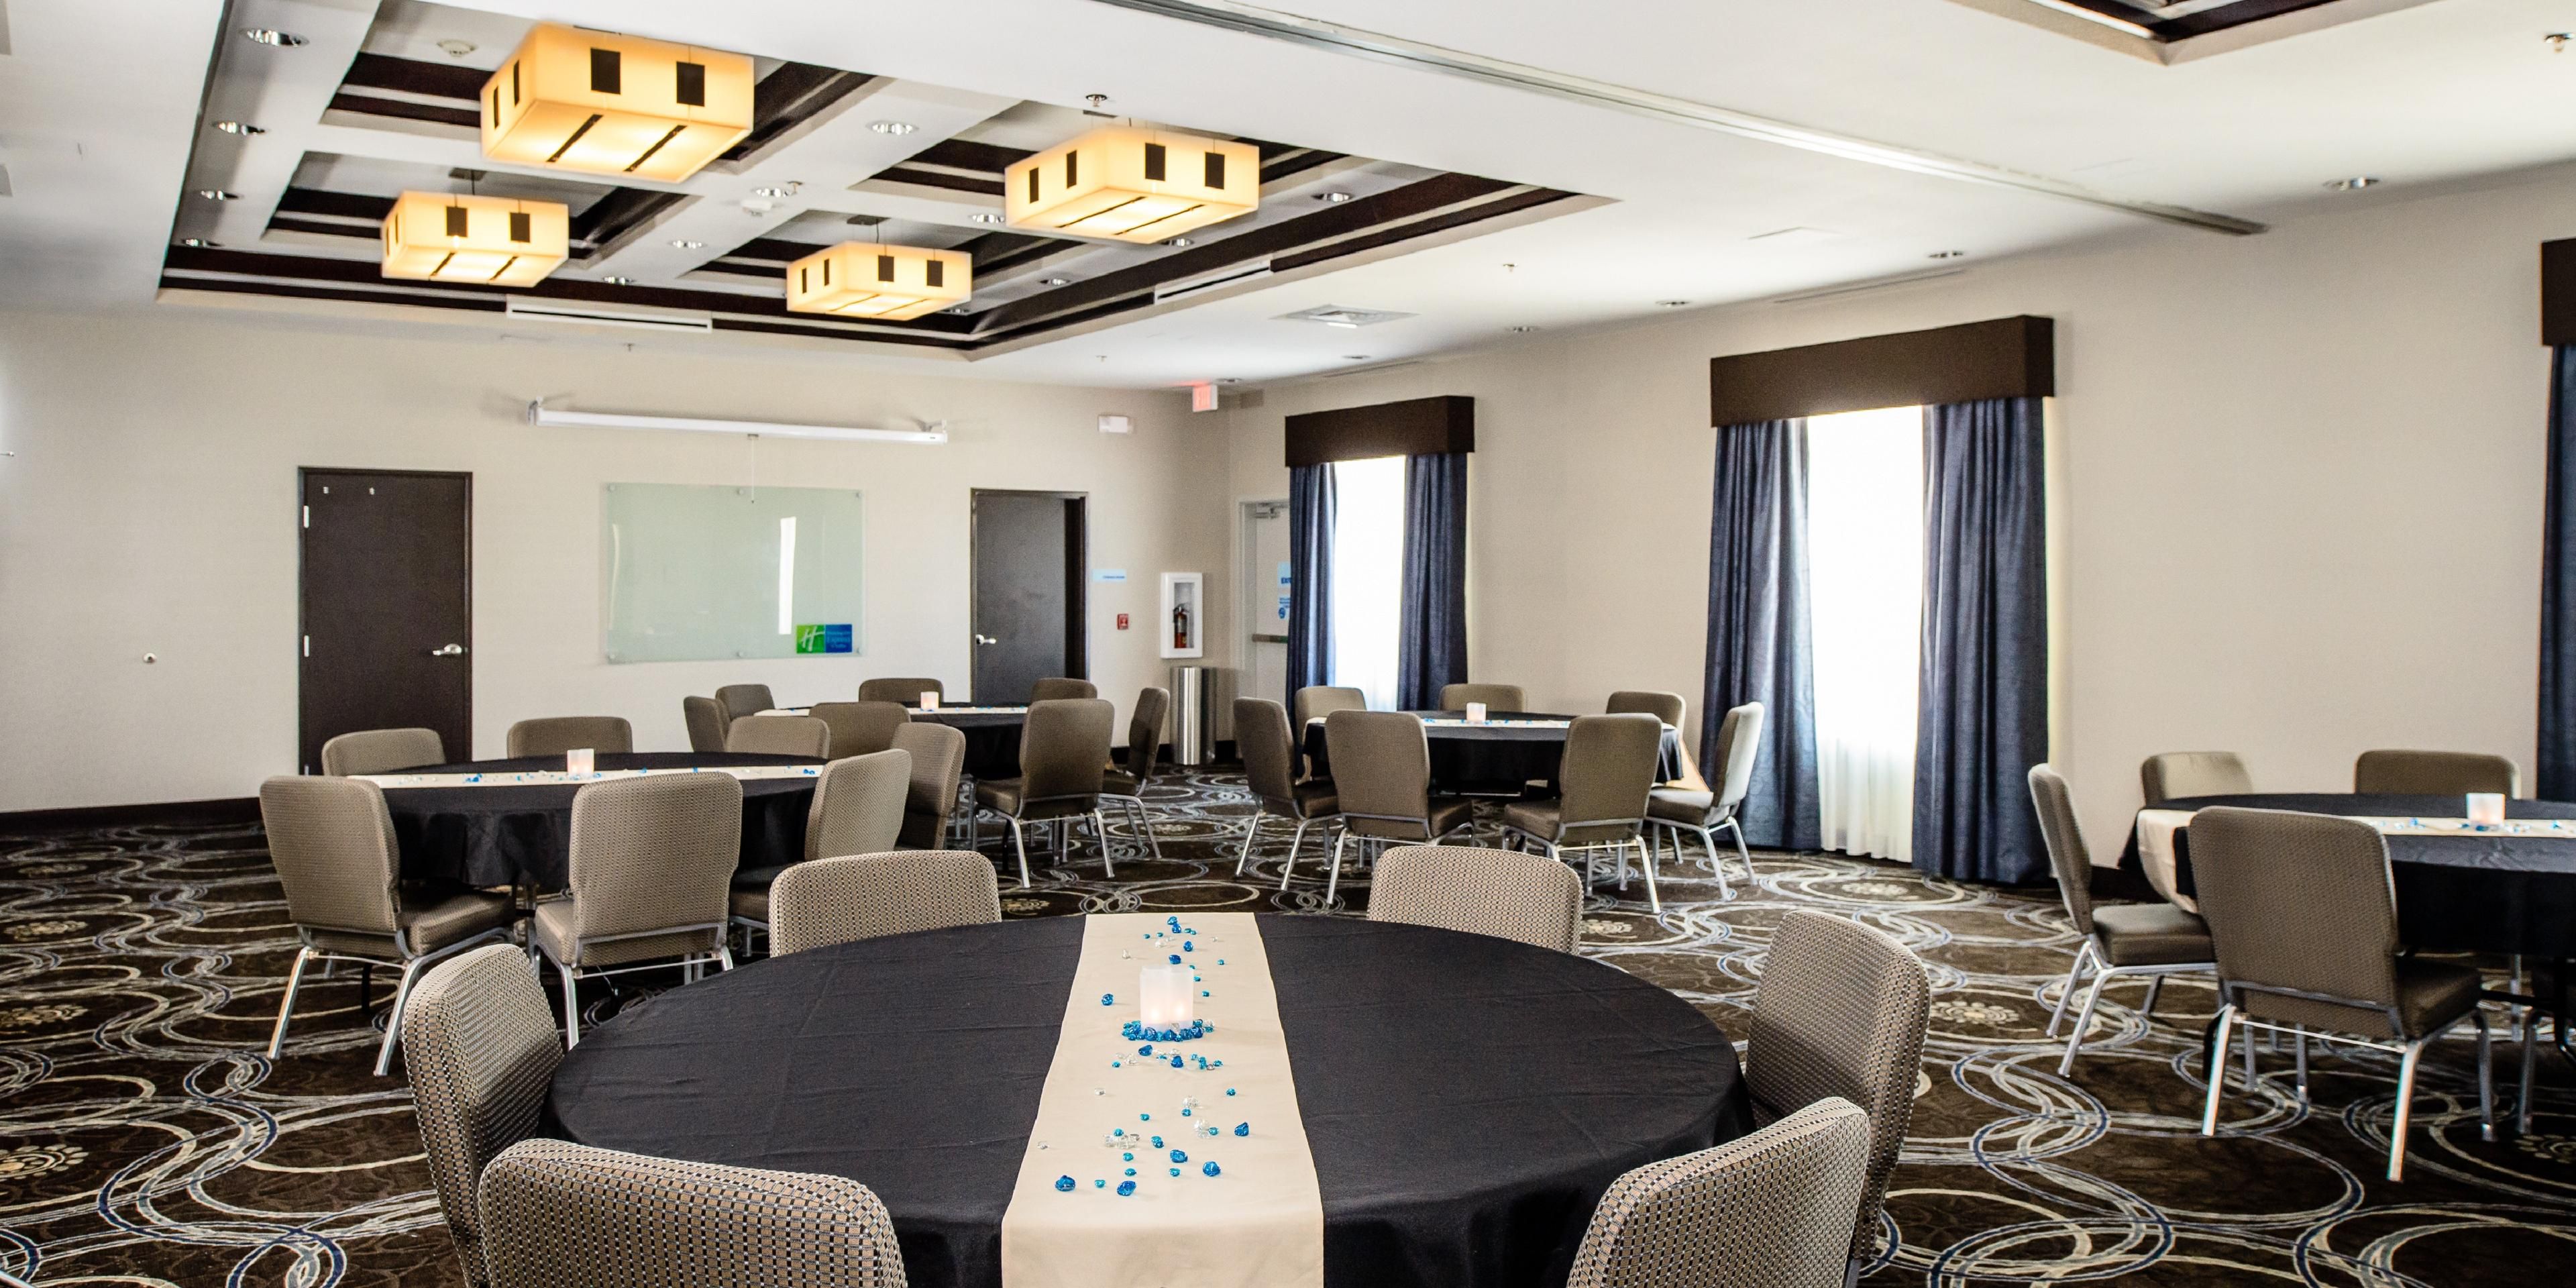 Our 1700 sq. foot. meeting room is fully equipped with everything you could possibly need for your business or pleasure needs. Use this space for a presentation or to get ready for your wedding party. It has a partition that also converts the room into 2!